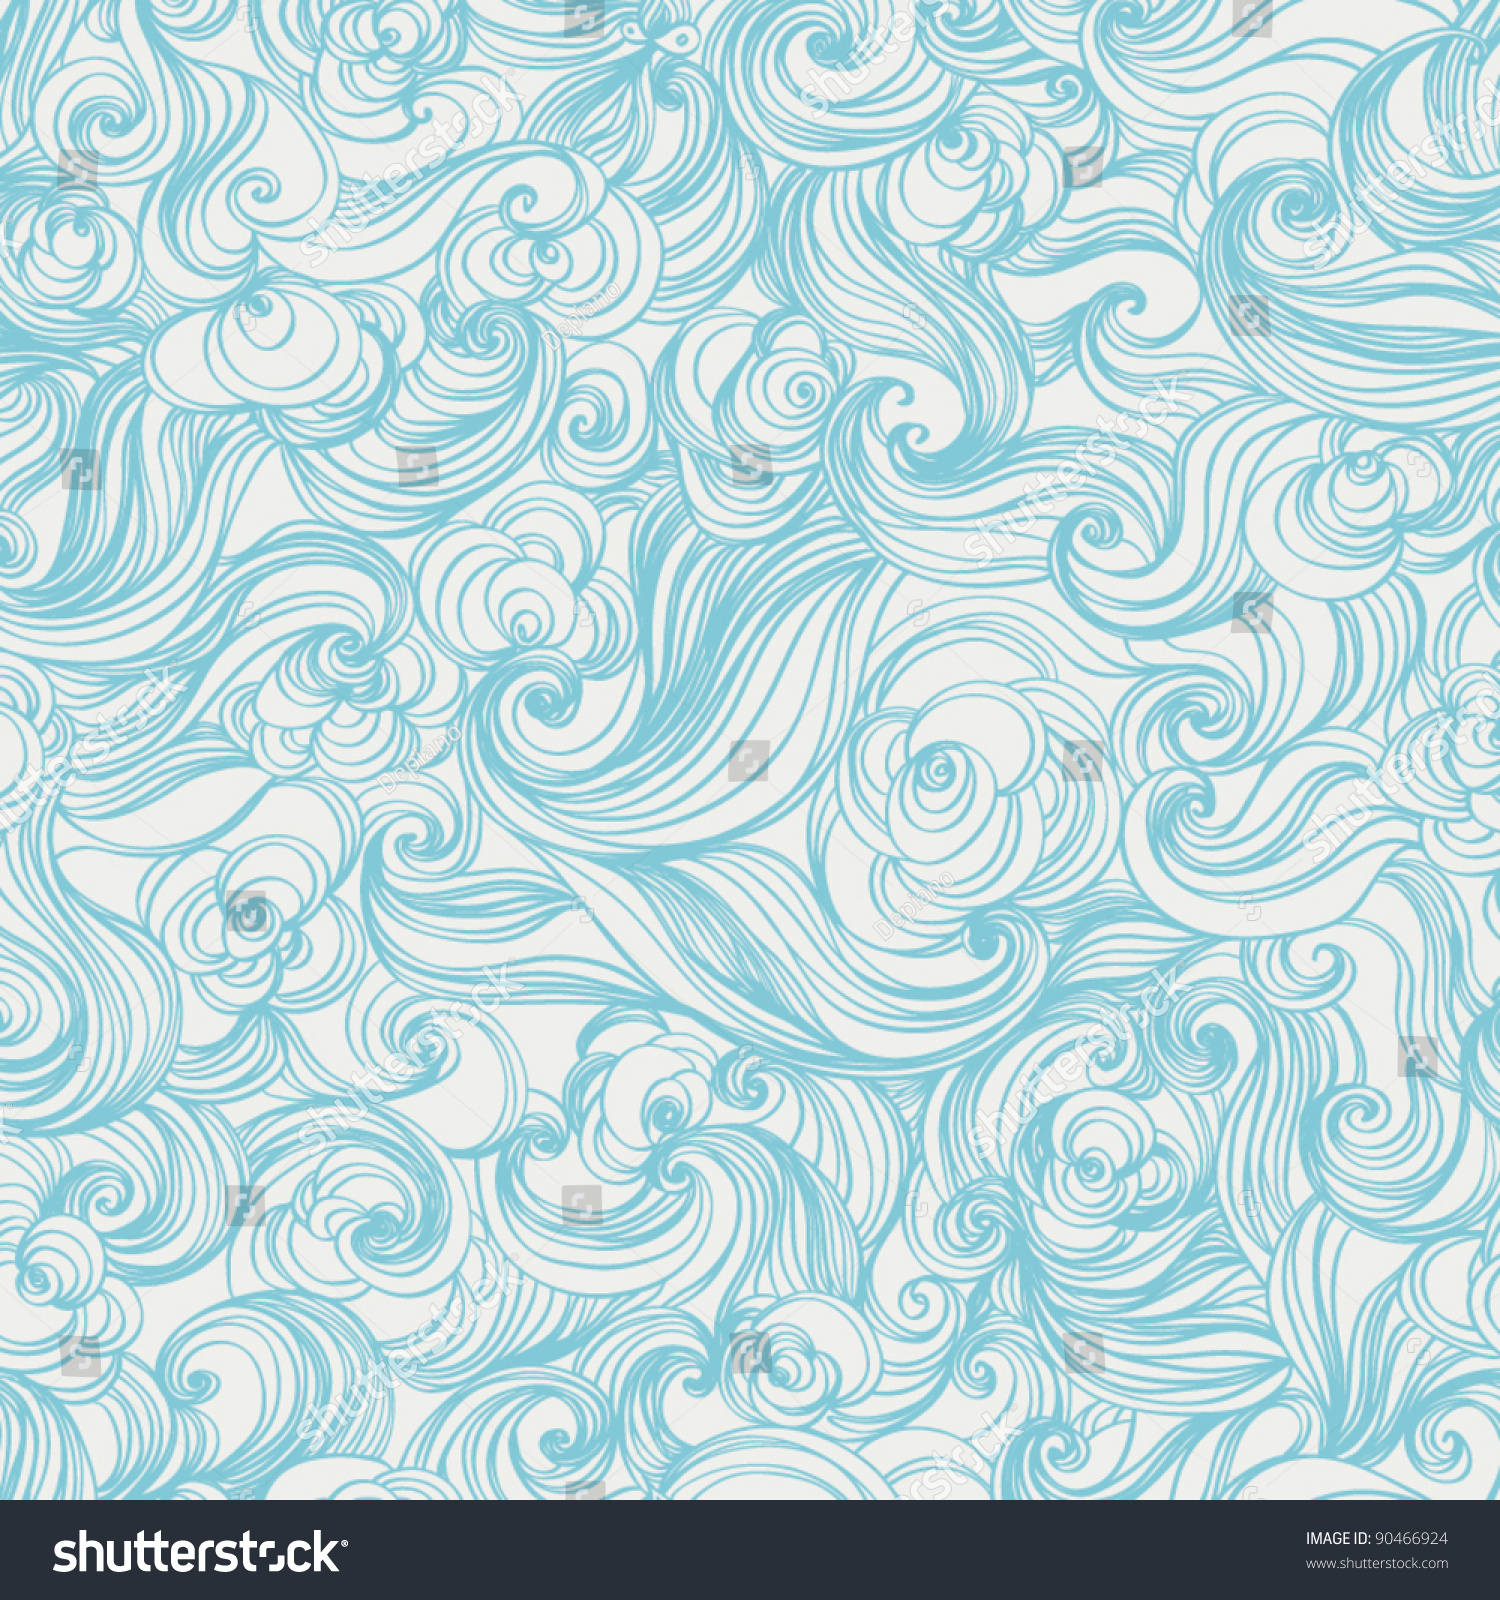 Colorful Seamless Abstract Handdrawn Pattern Waves Stock Vector ...